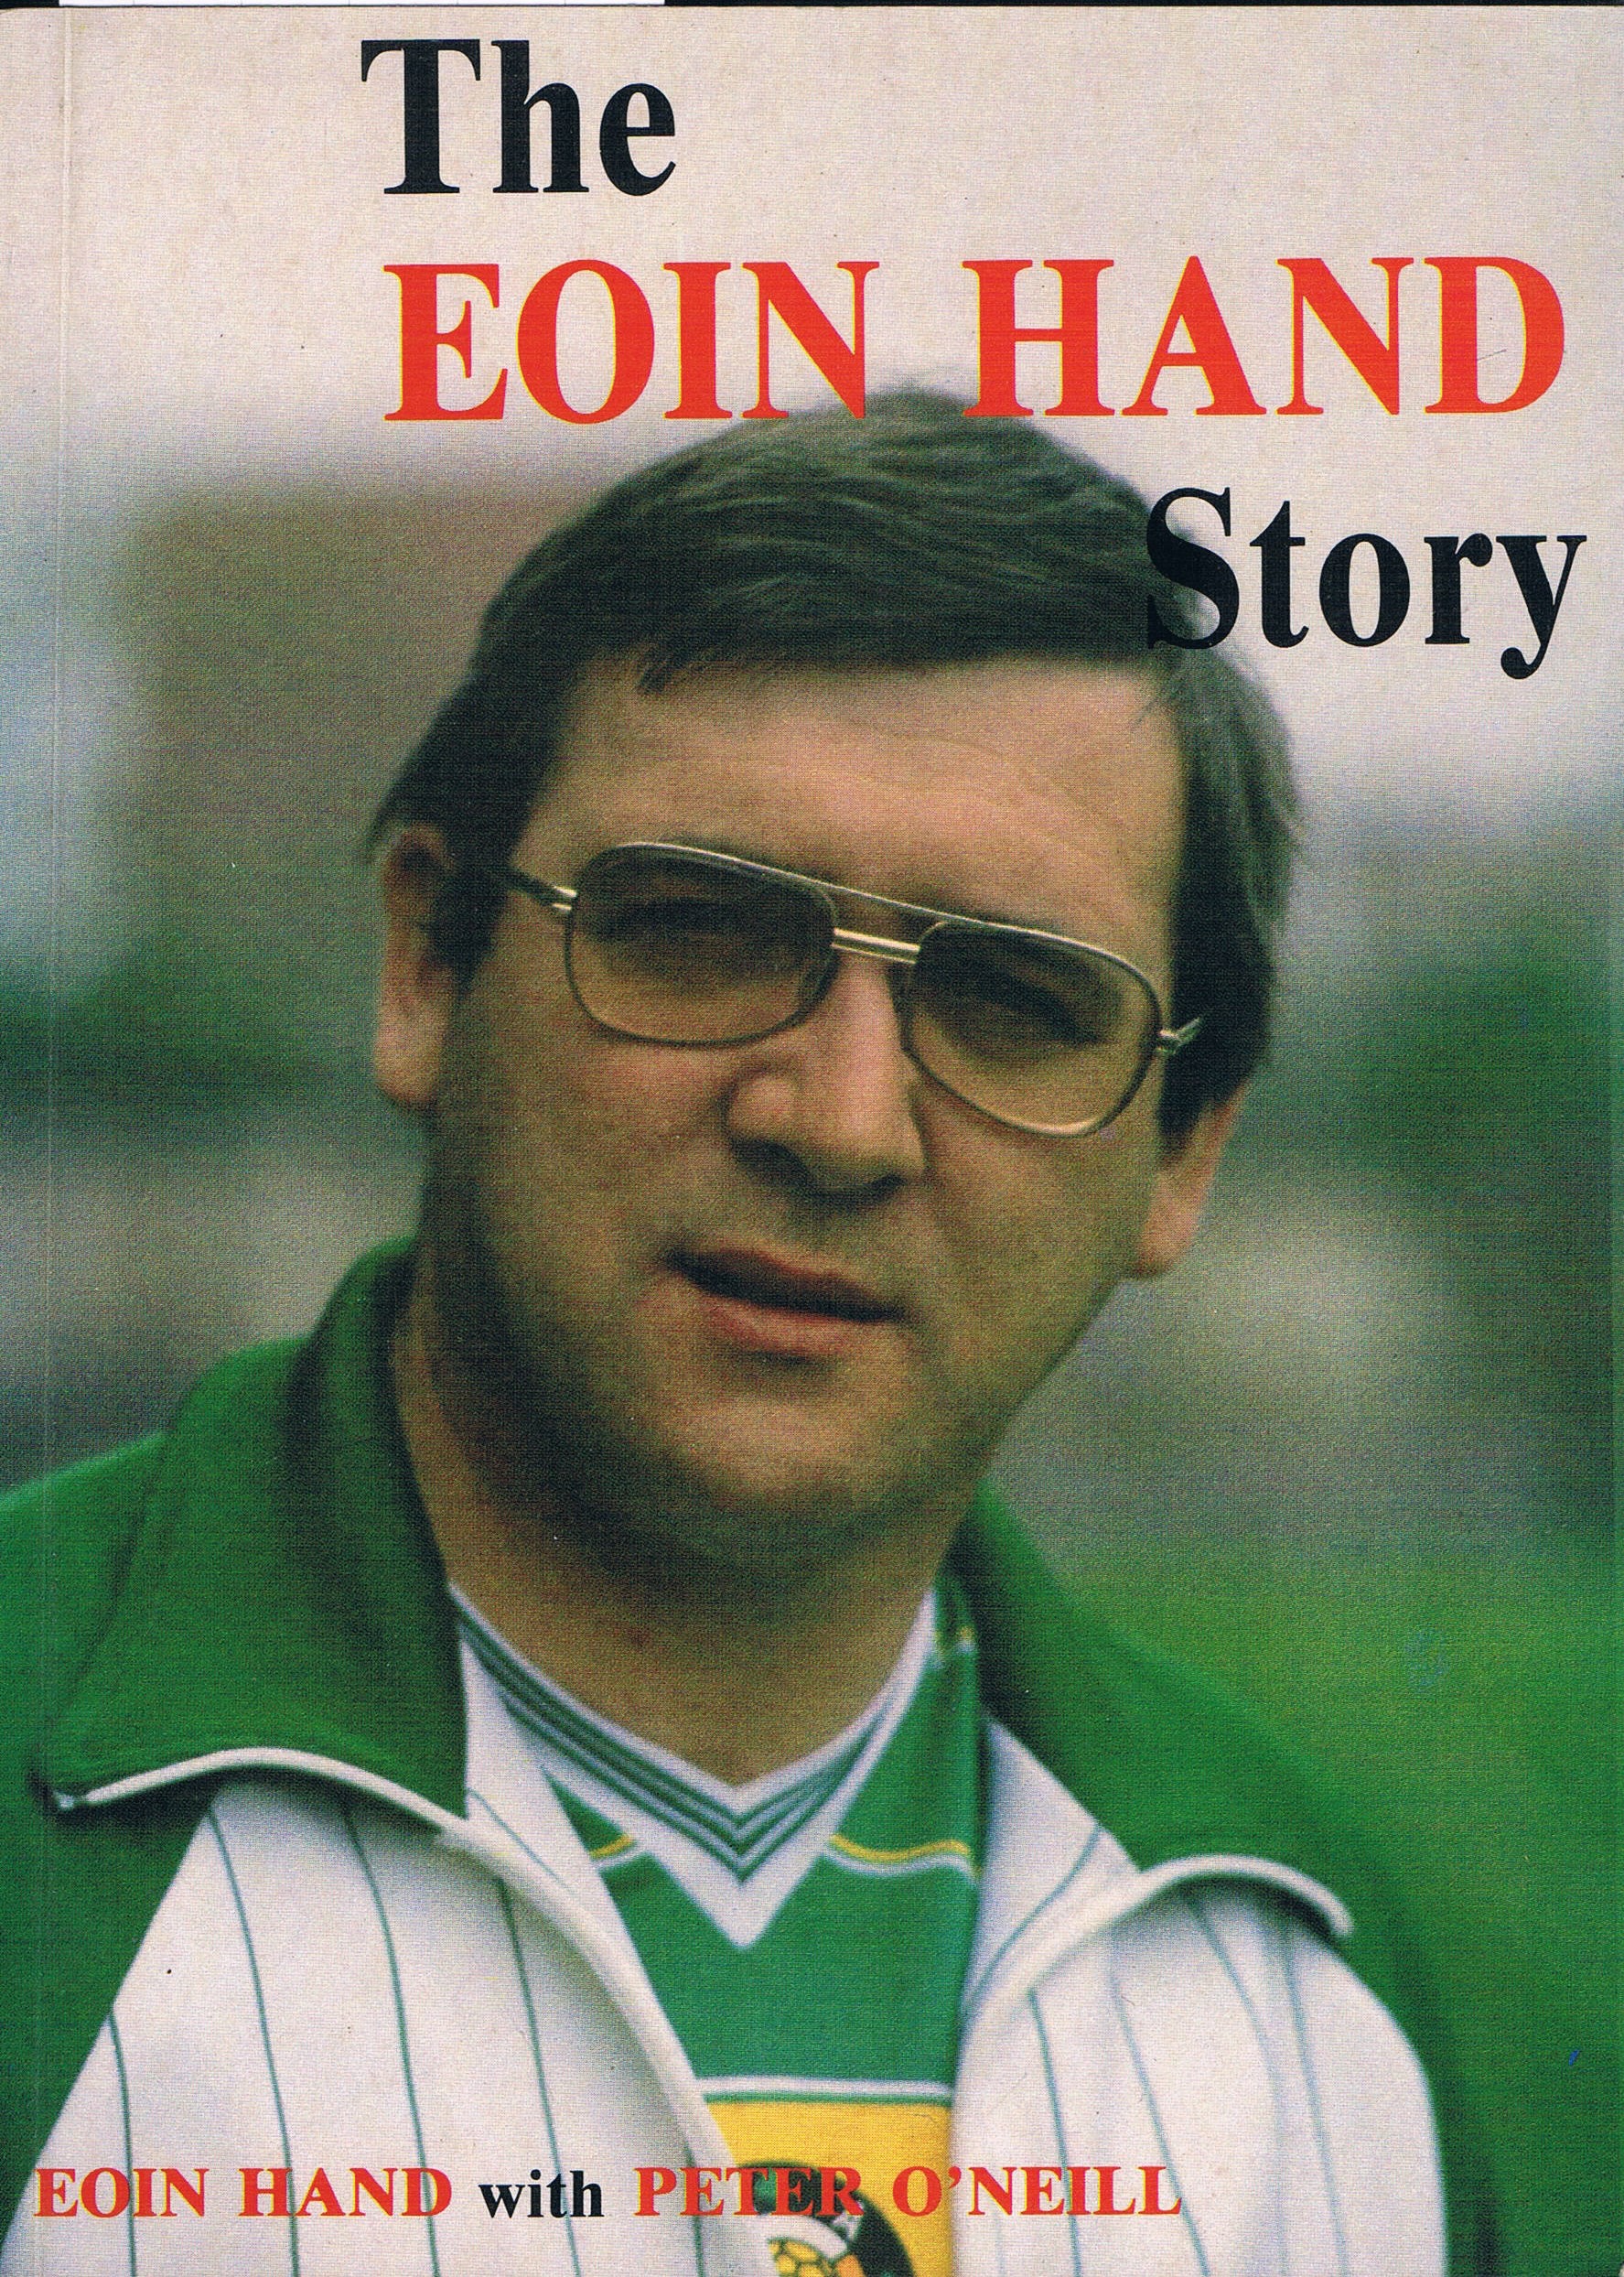 The Eoin Hand Story by Eoin Hand & Peter O'Neill